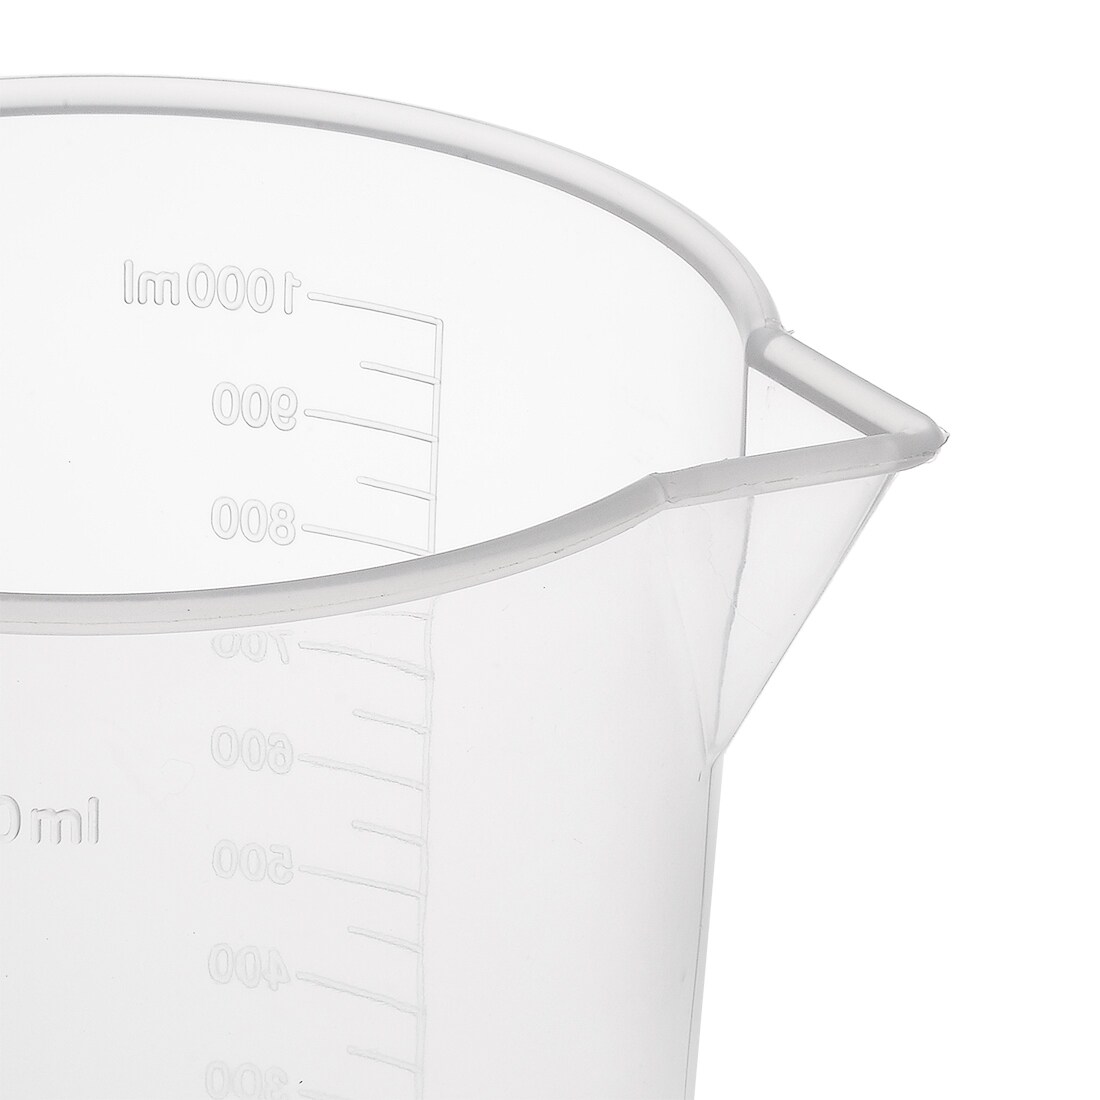 https://ak1.ostkcdn.com/images/products/is/images/direct/e094a17623aed2ac14af92d2eff88ac575ad9983/Laboratory-Clear-PP-Plastic-Measuring-Cup-Handled-Beaker-300mL-1000mL-Set-of-3.jpg